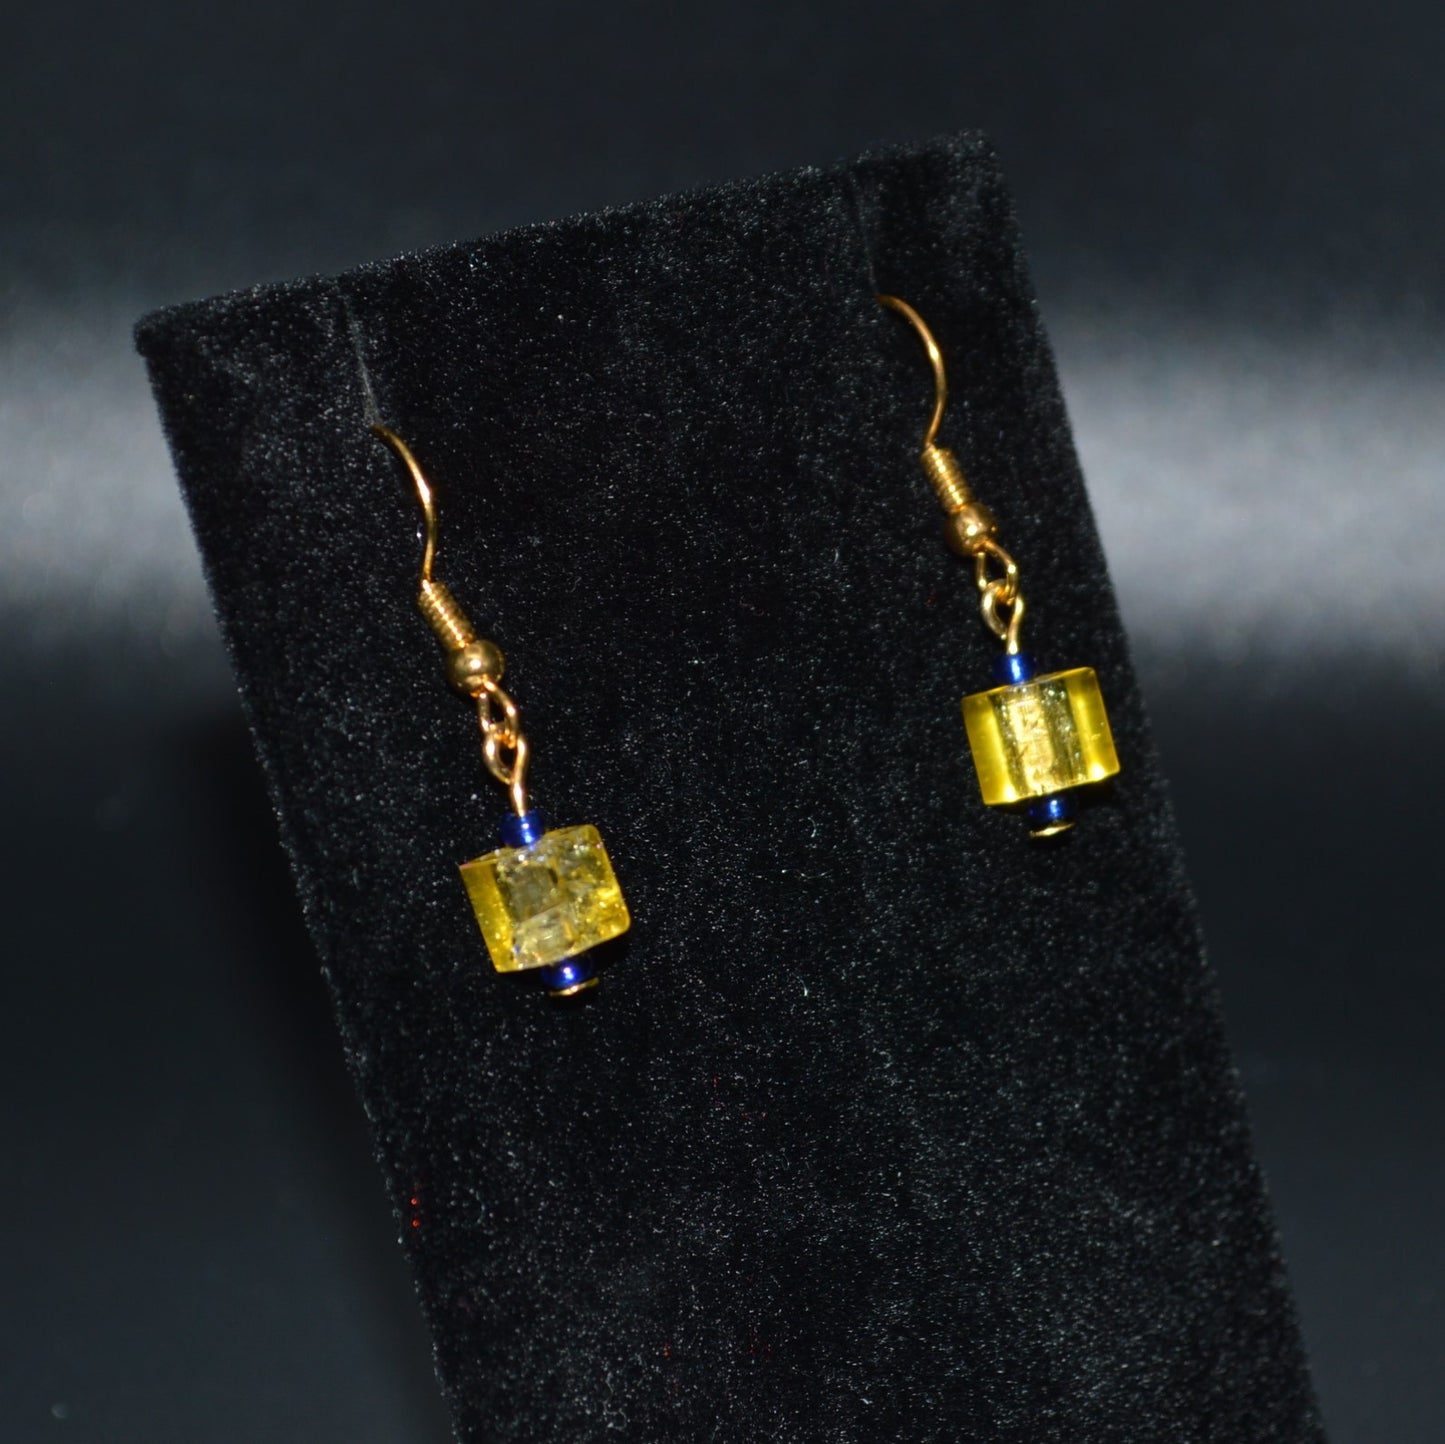 Yellow Crackled Glass Earrings with Blue Seed Beads (Short)